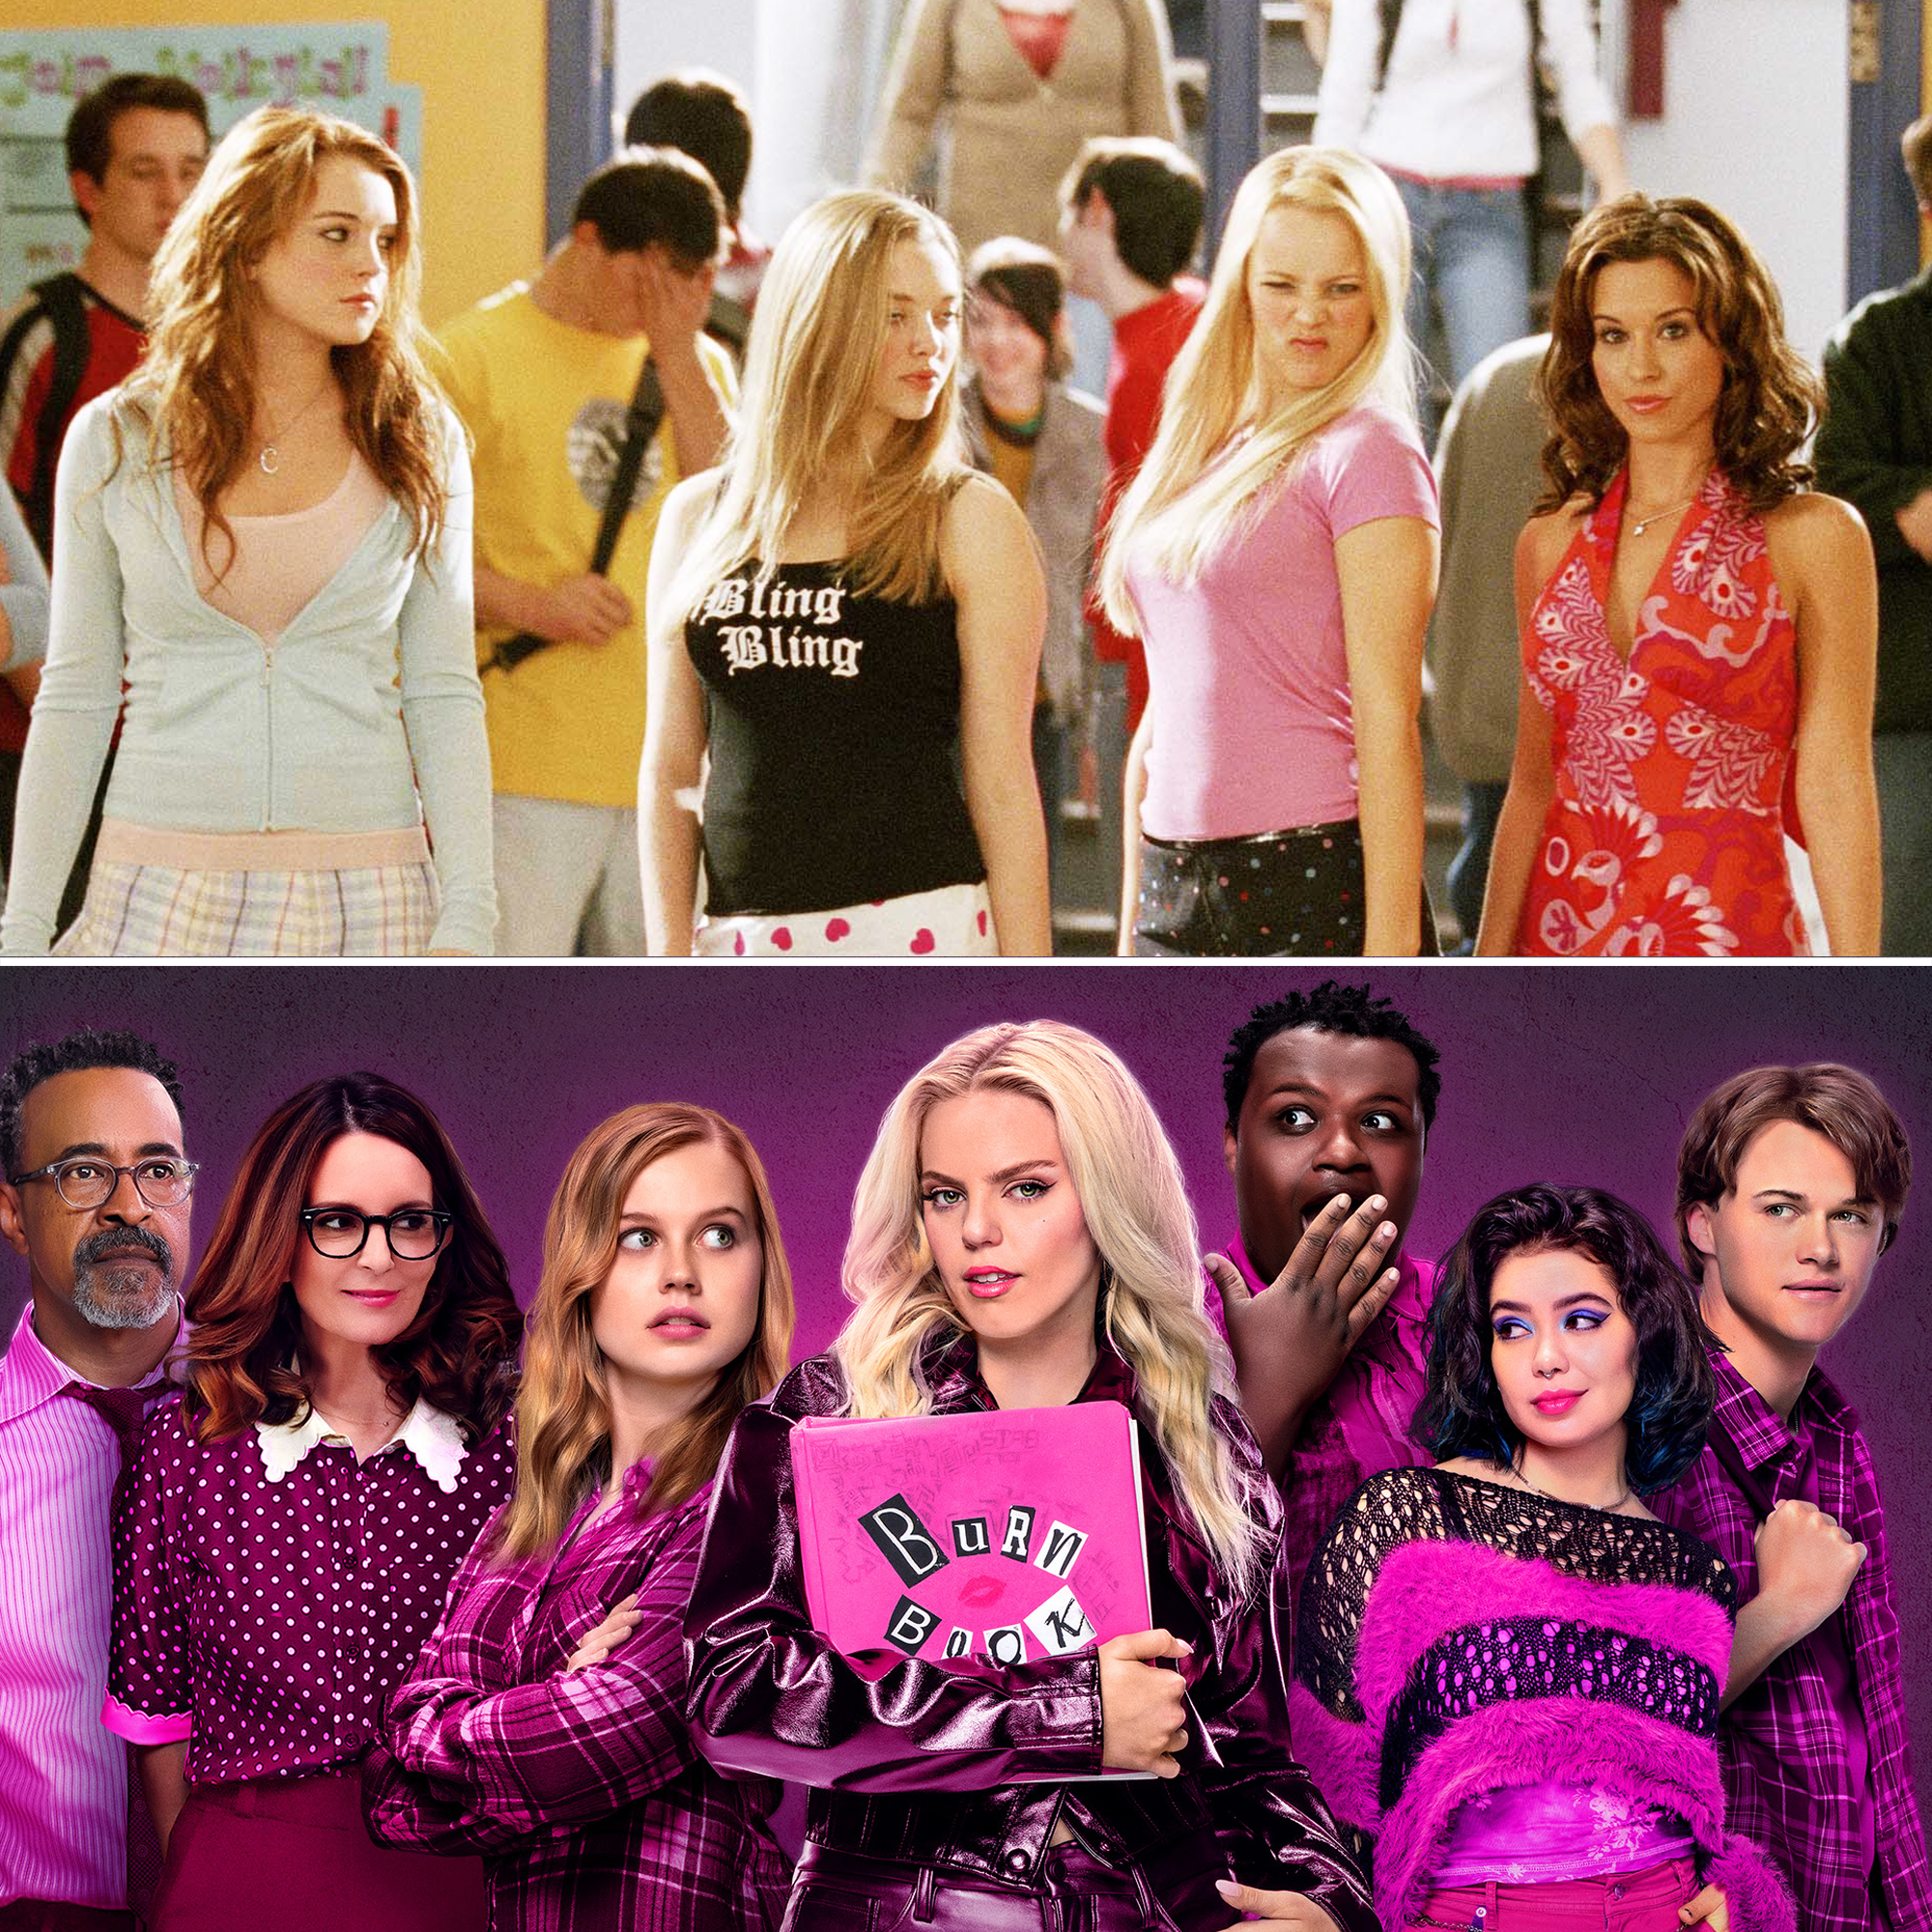 Mean Girls the Musical' Movie: Everything to Know